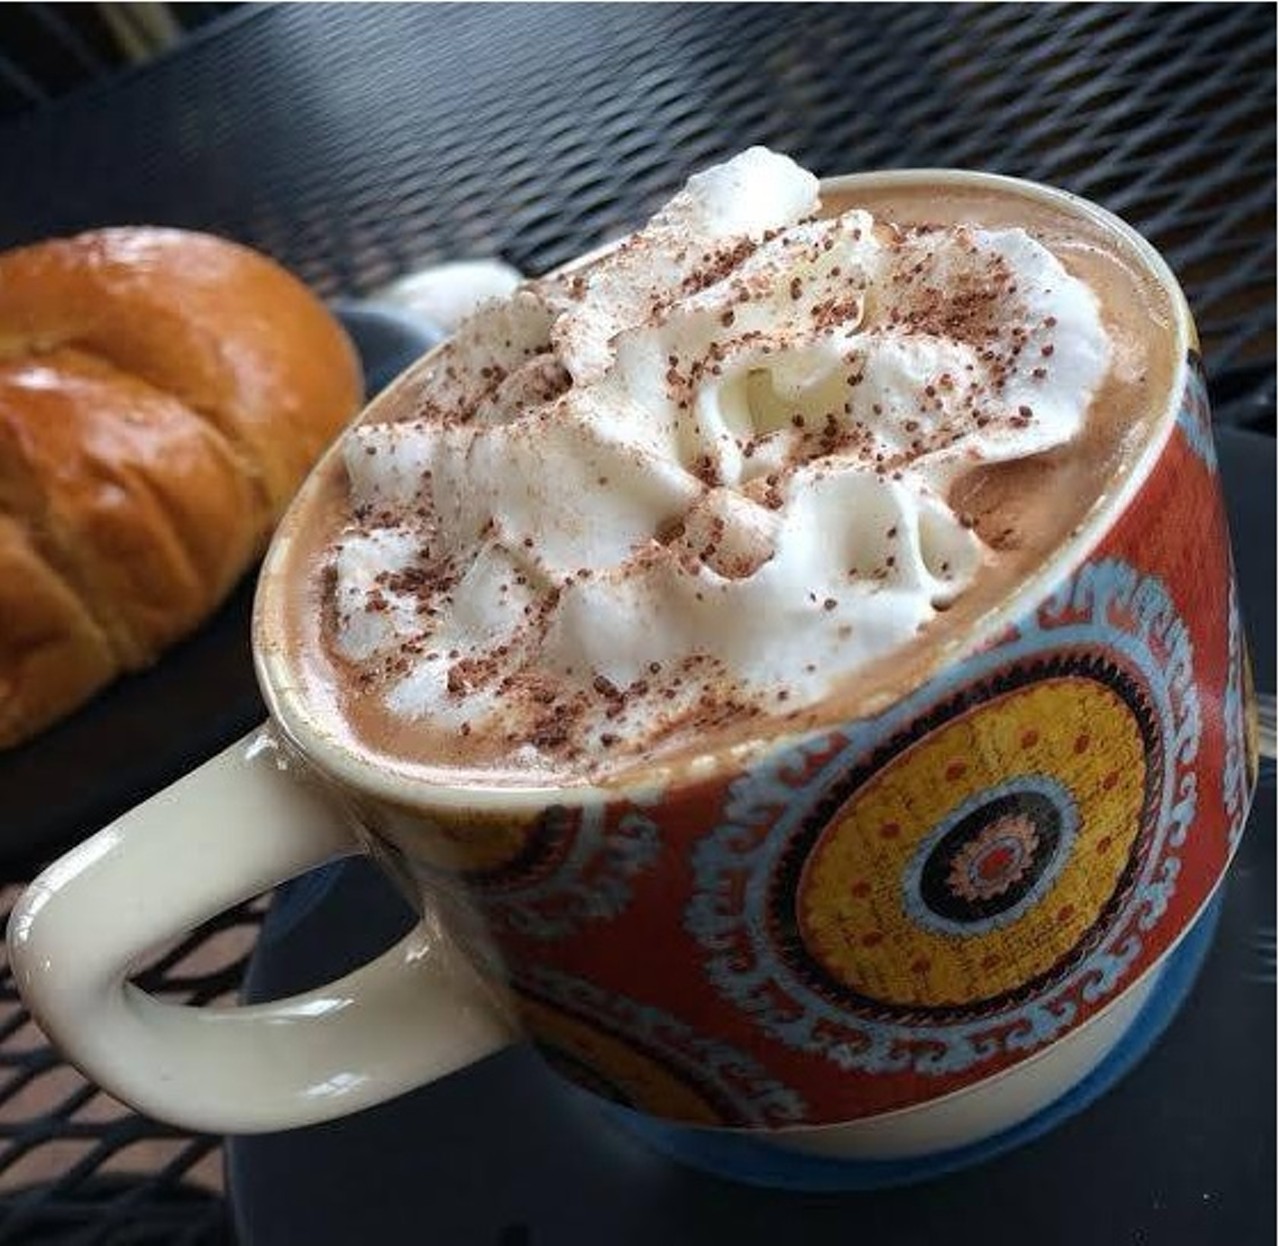 Cafe Con Leche - 4200 W. Vernor, Detroit ,br>
With a Latin-infused menu, Cafe Con Leche goes beyond the familiar with cinnamon-spiced Mexican hot chocolate and other rich hot chocolate drinks. $2.45-$4. (Photo via Facebook, At Cafe Con Leche)